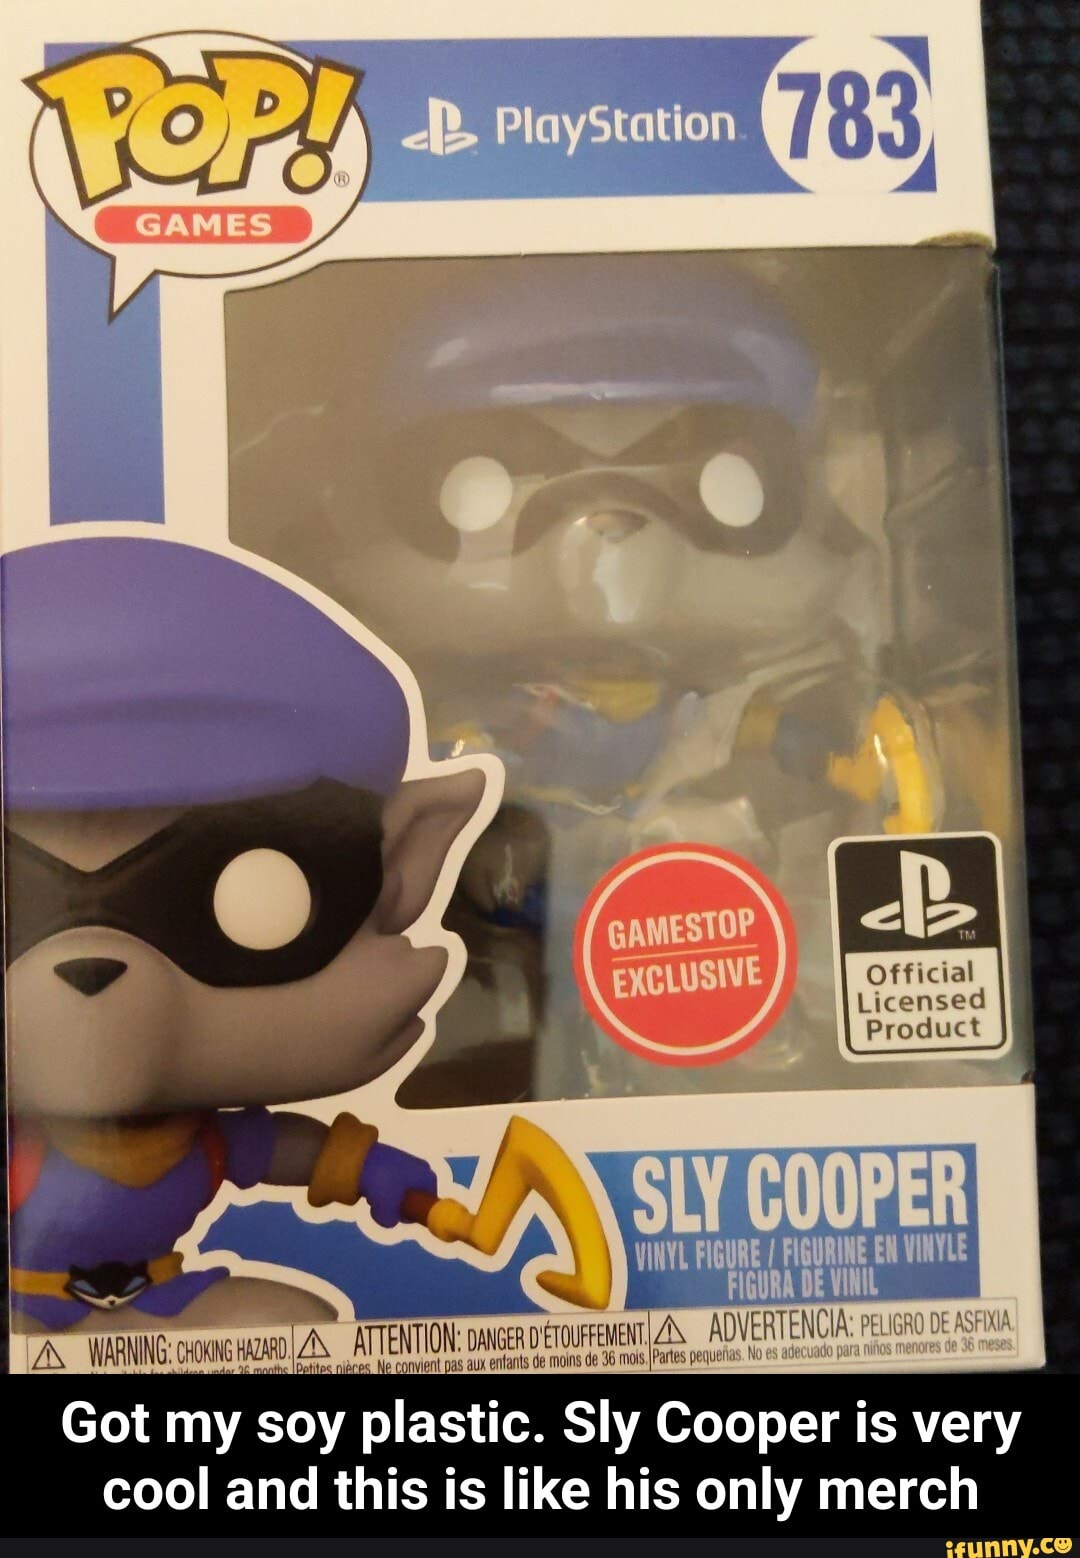  Funko Pop! Playstation 783 Sly Cooper Exclusive Figure